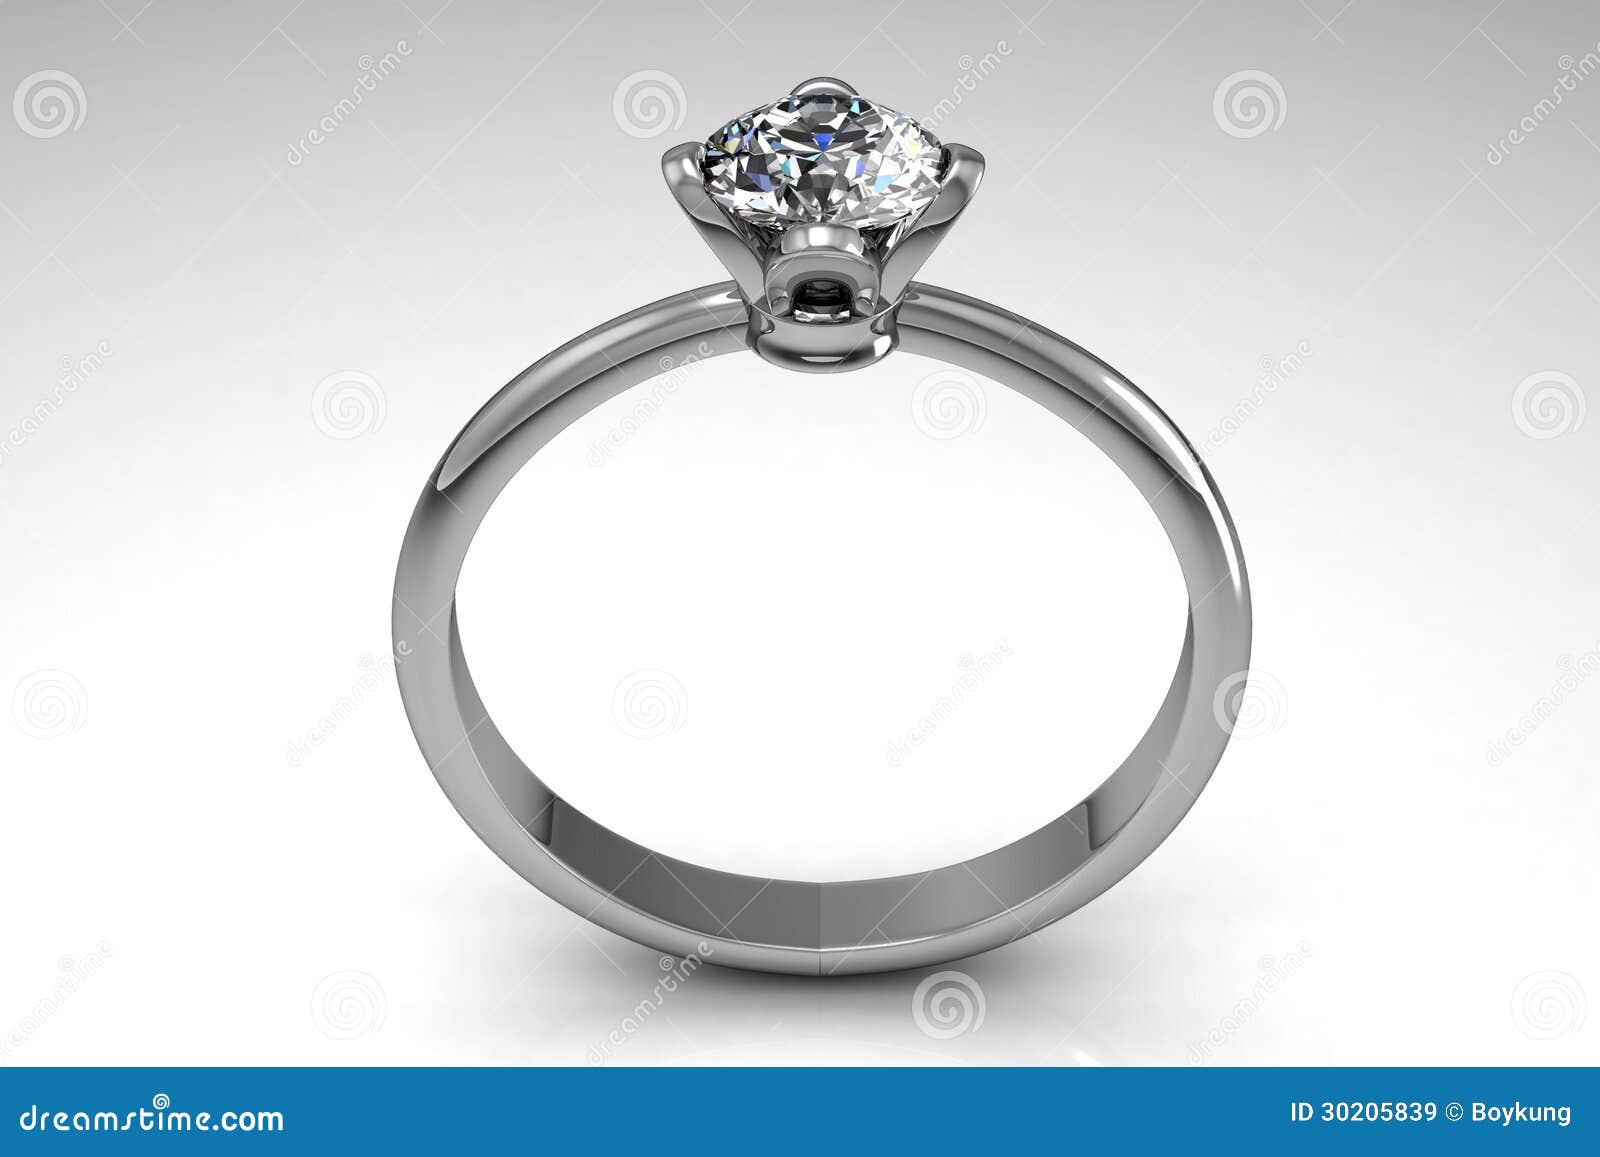 The beauty wedding ring stock image. Image of chain, jewellery - 30205839